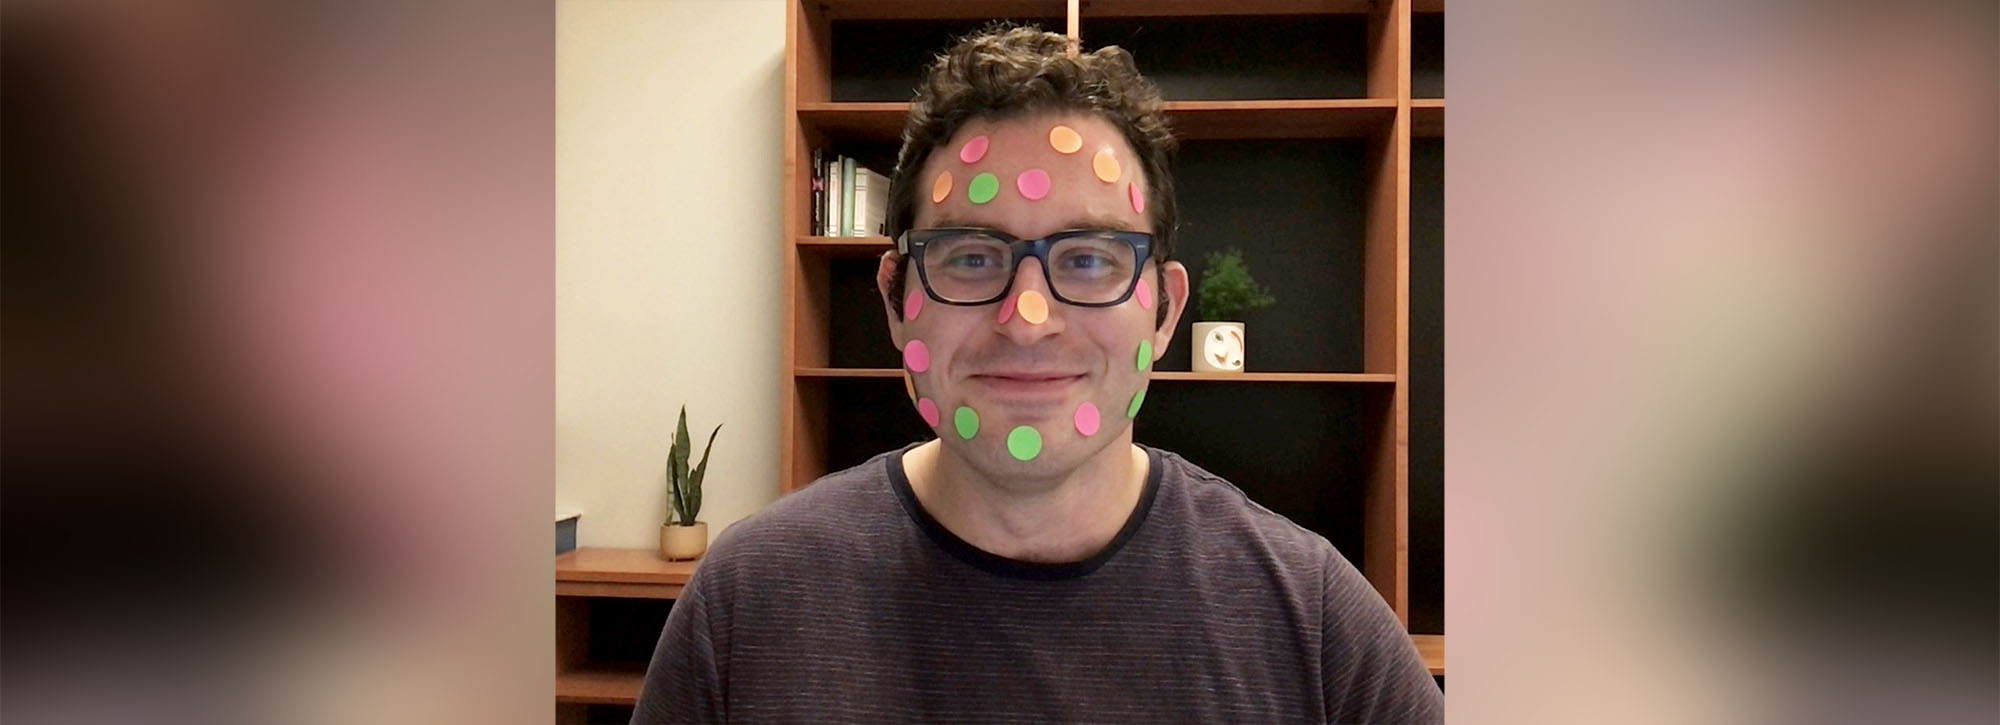 PHOTO: Arber Tasimi, 31, a psychology professor at Emory University, uses stickers to keep his students engaged during remote learning.